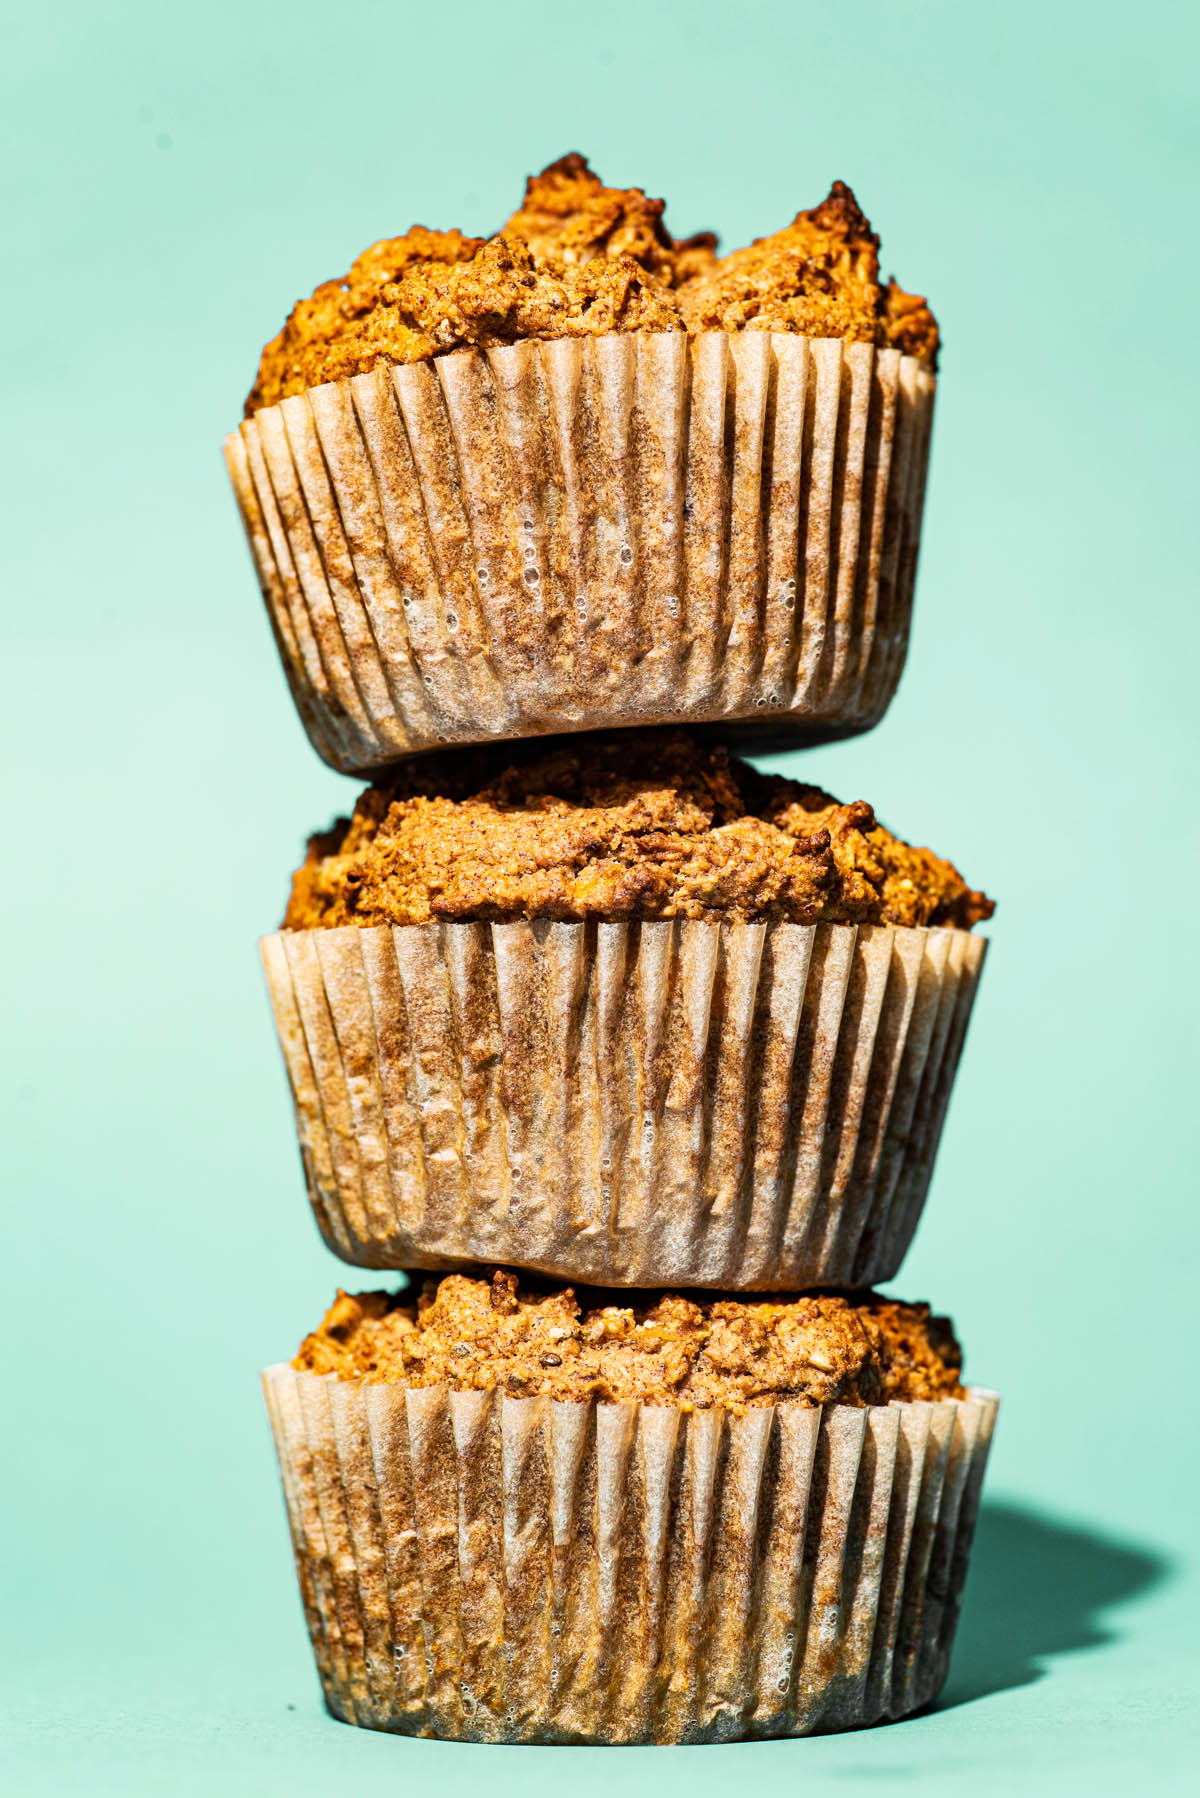 Stack of three muffins against an aqua-green background.